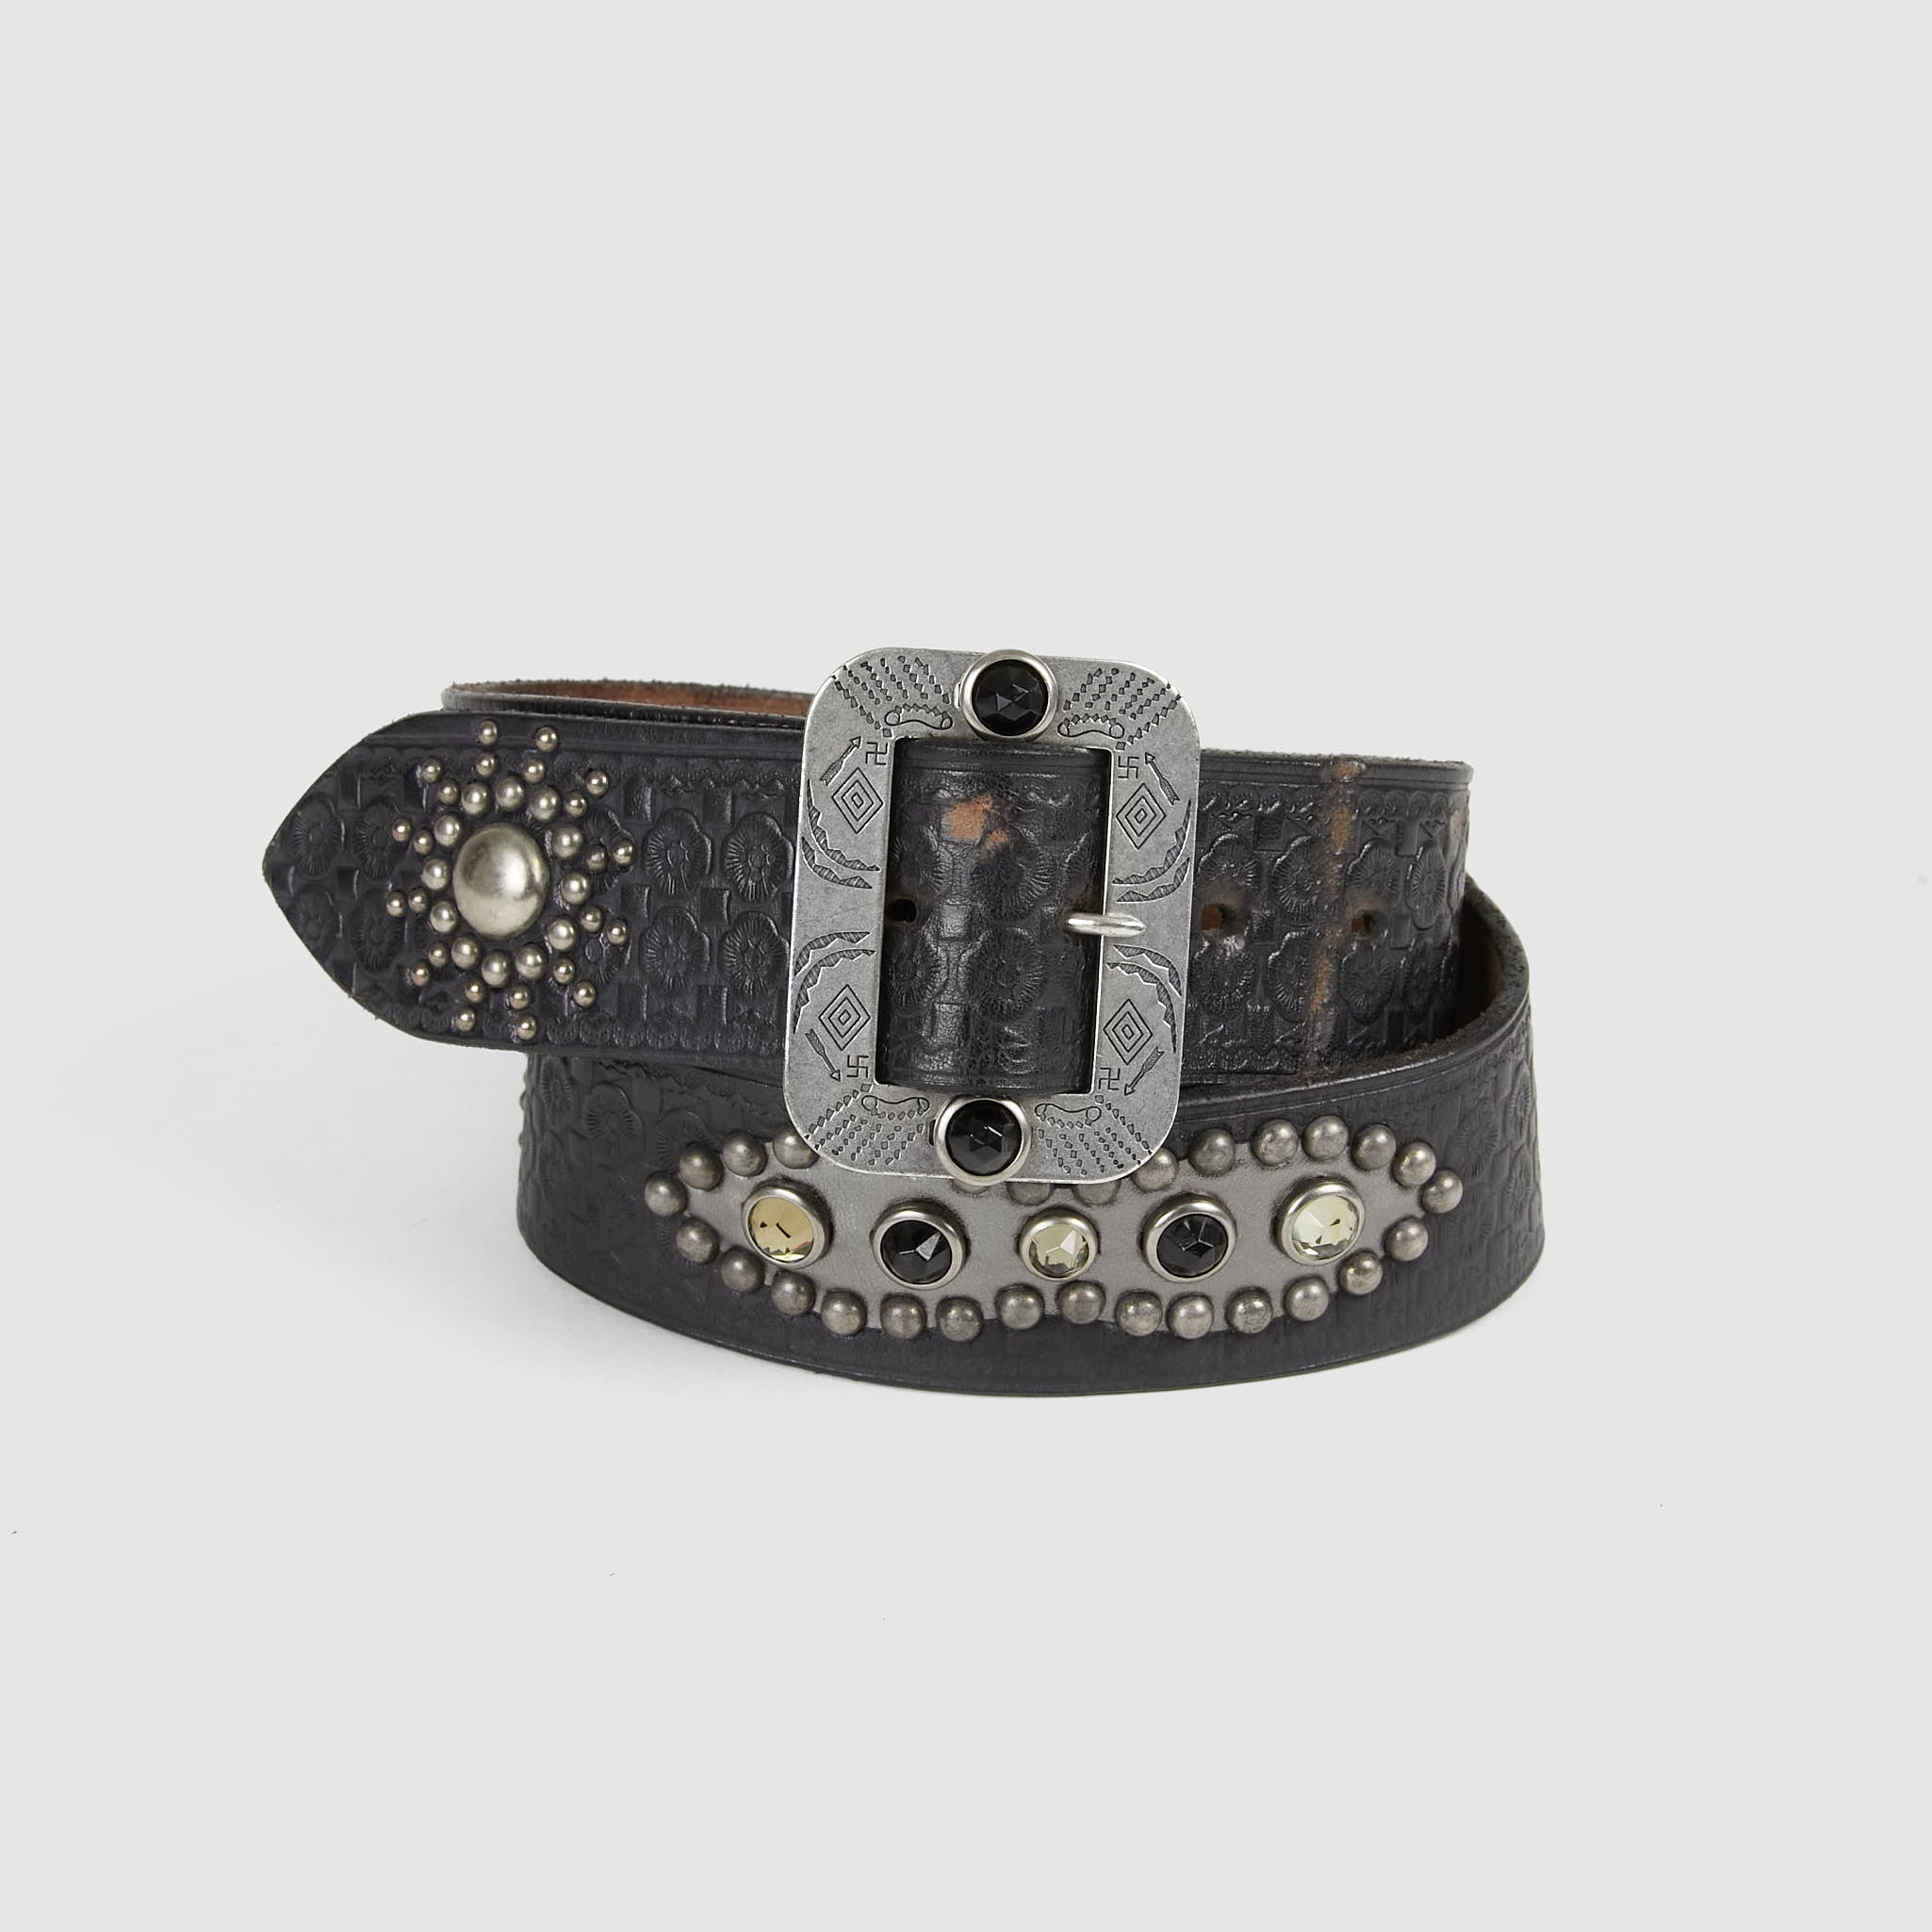 HTC Antique Leather Belt with Studs - DeeCee style